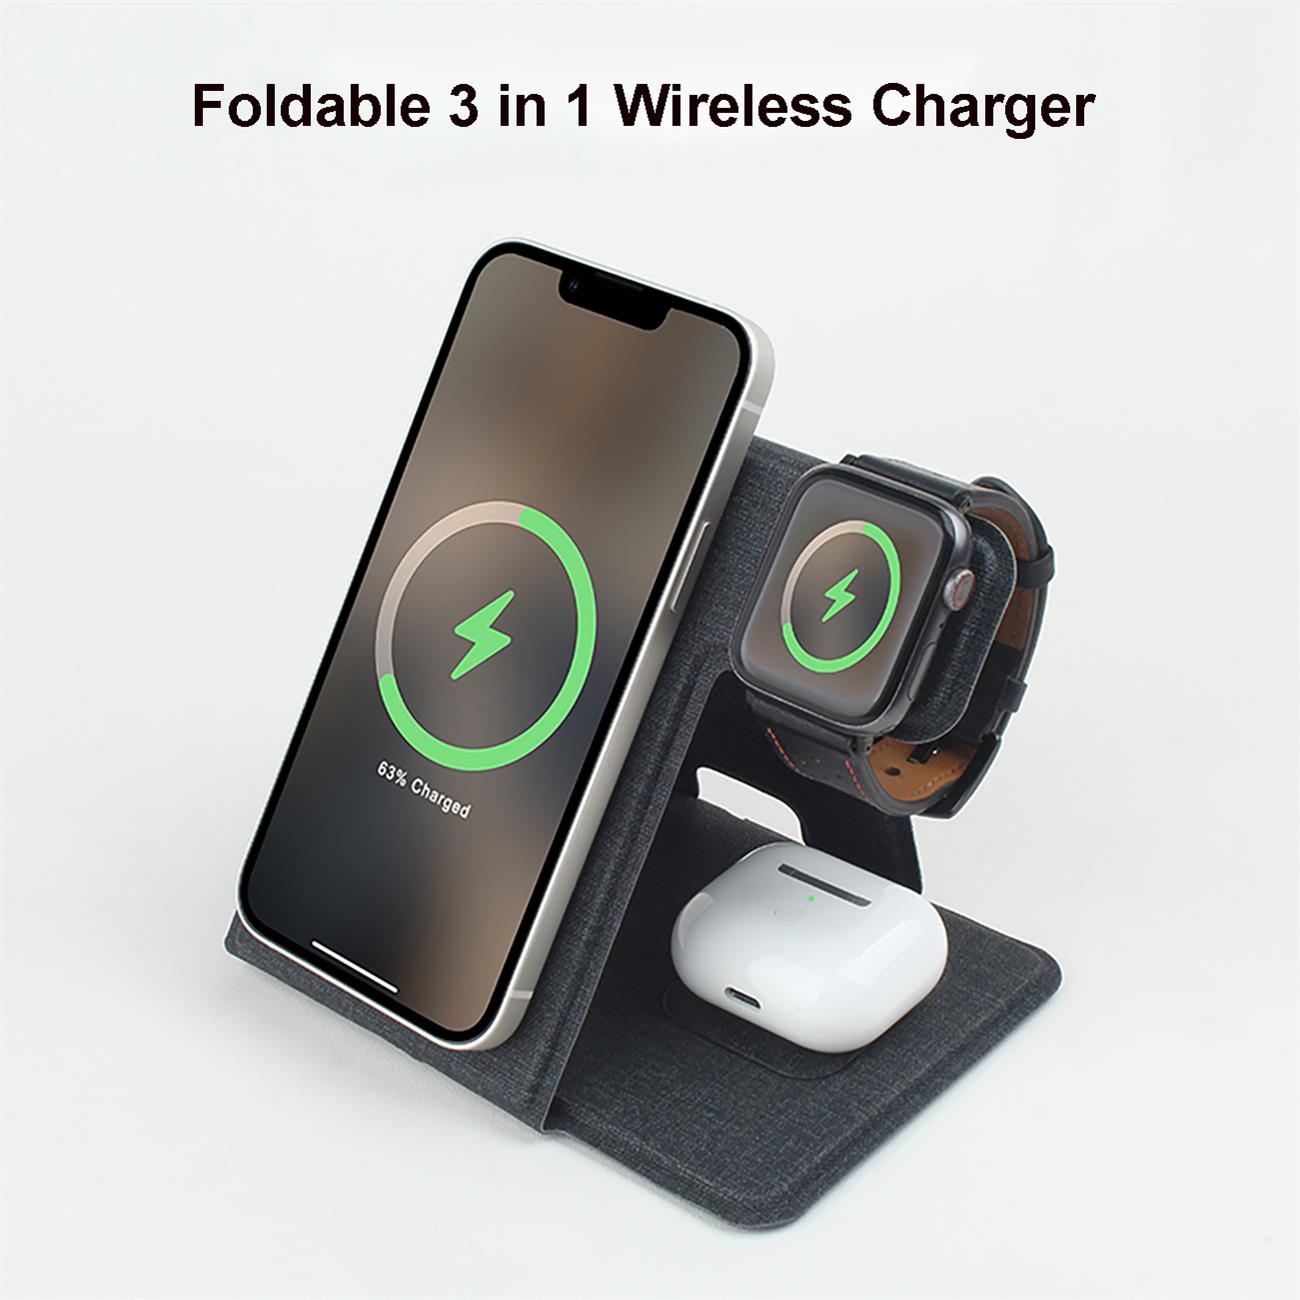 Magnetic Fabric Wireless Charger Foldable 3 In 1 For Apple And Samsung Phone Watch Earpod